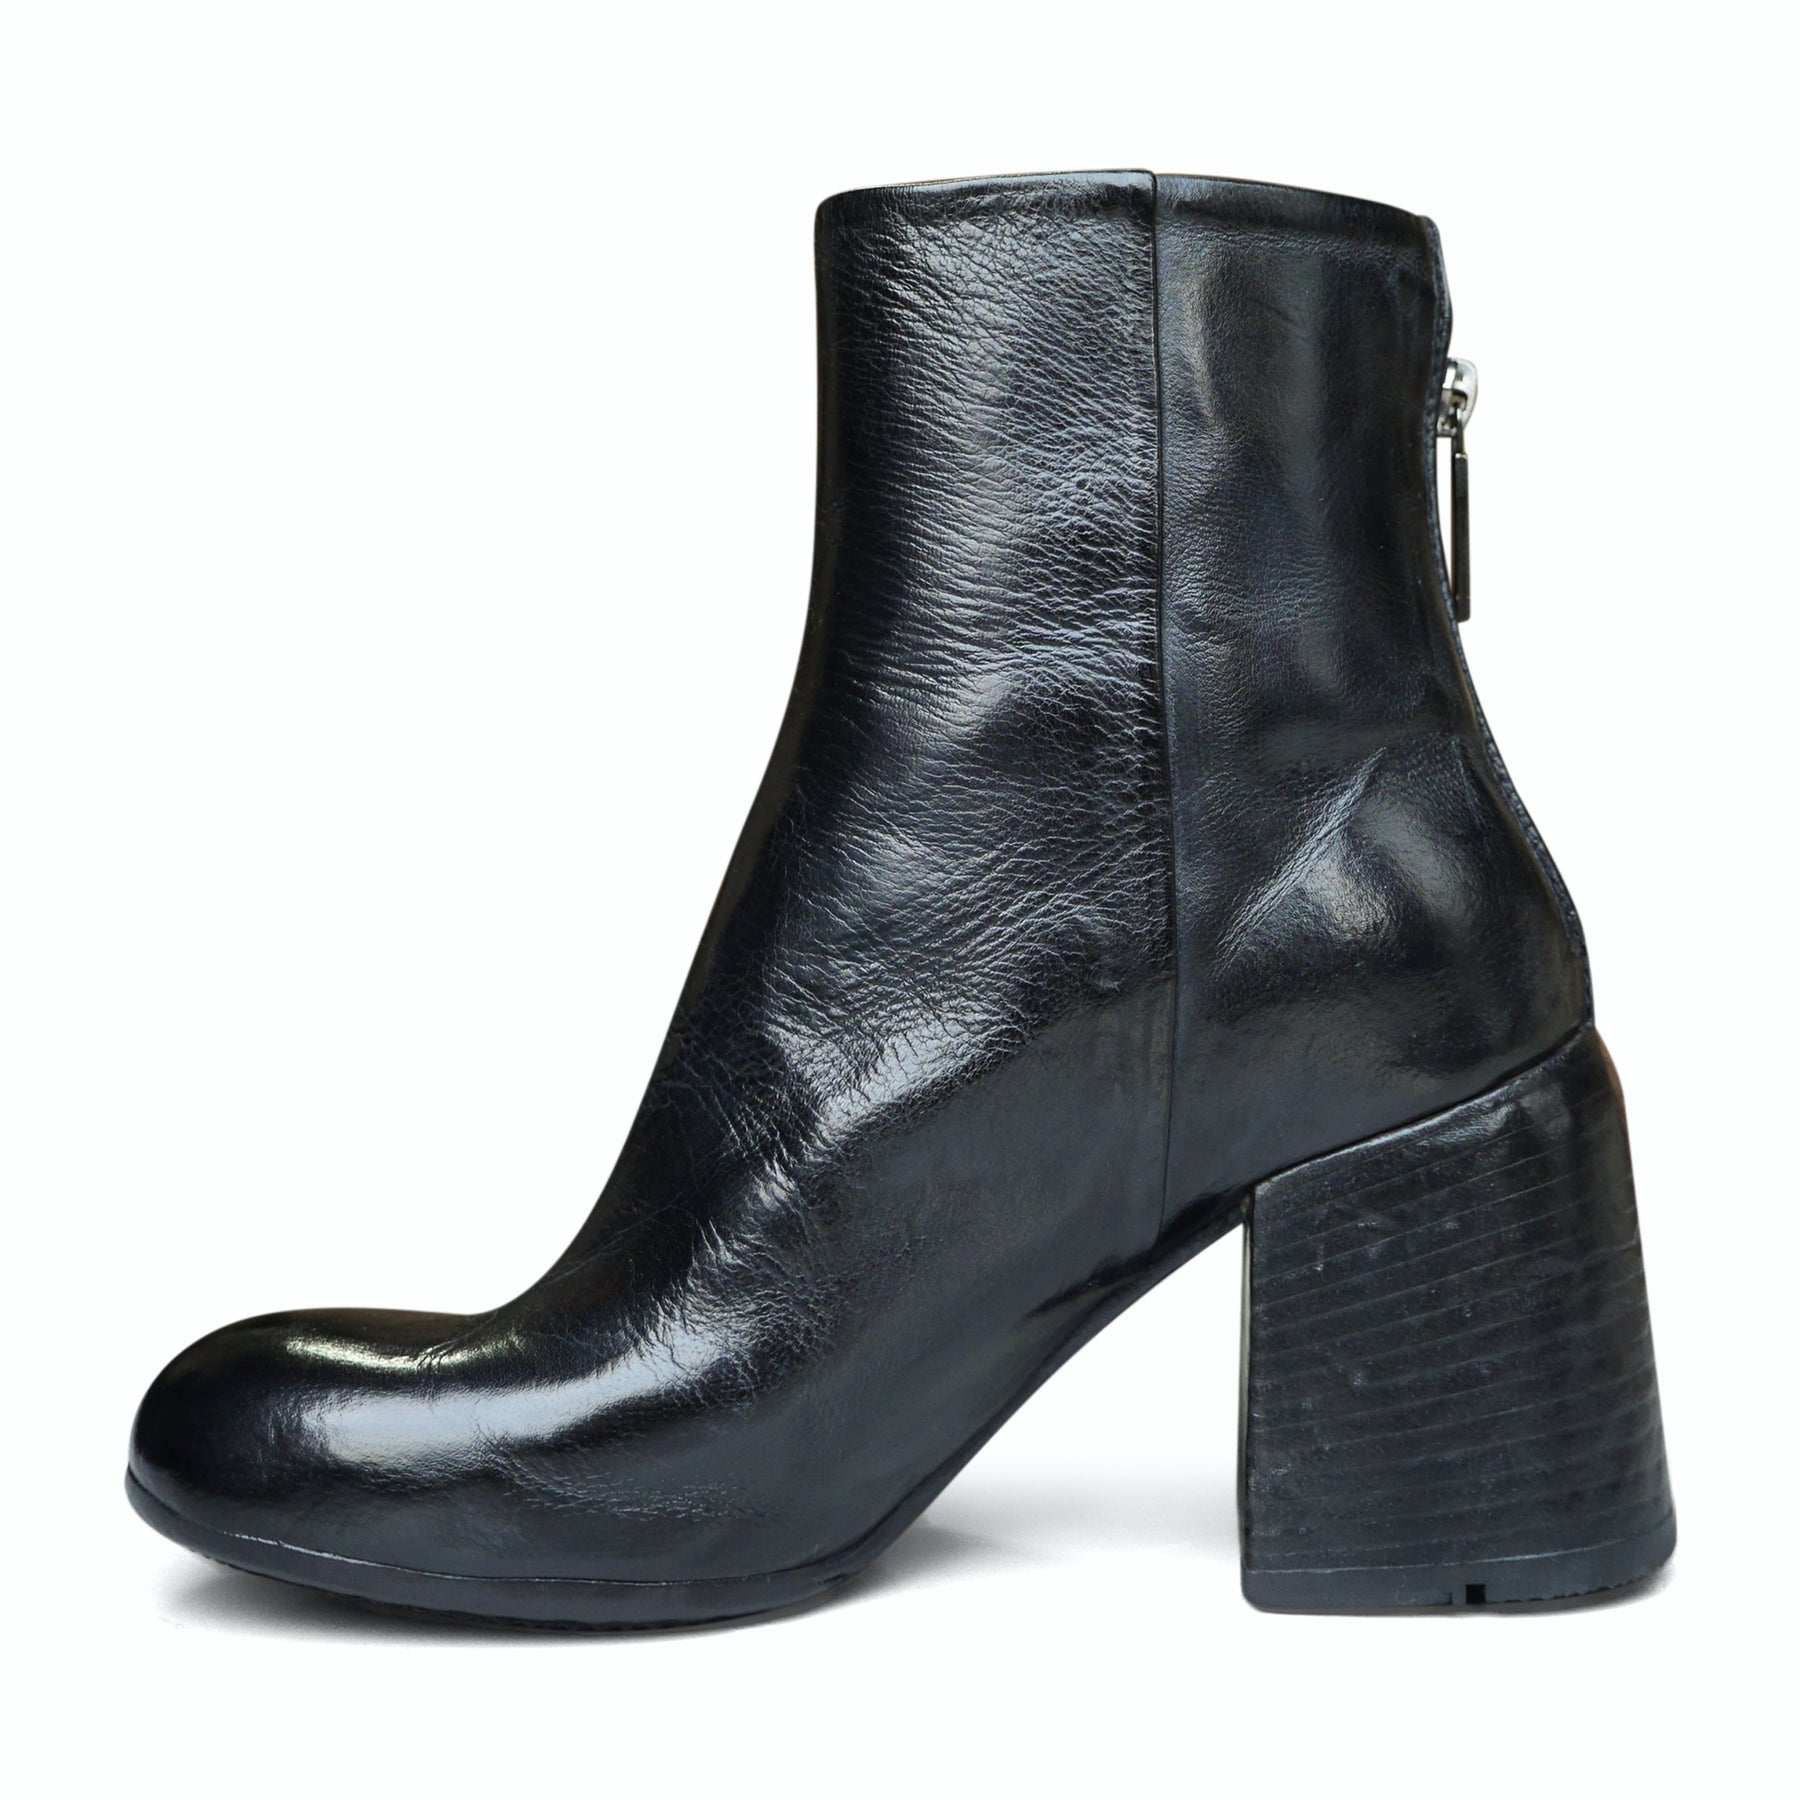 FPO2A - Black Ankle Boot